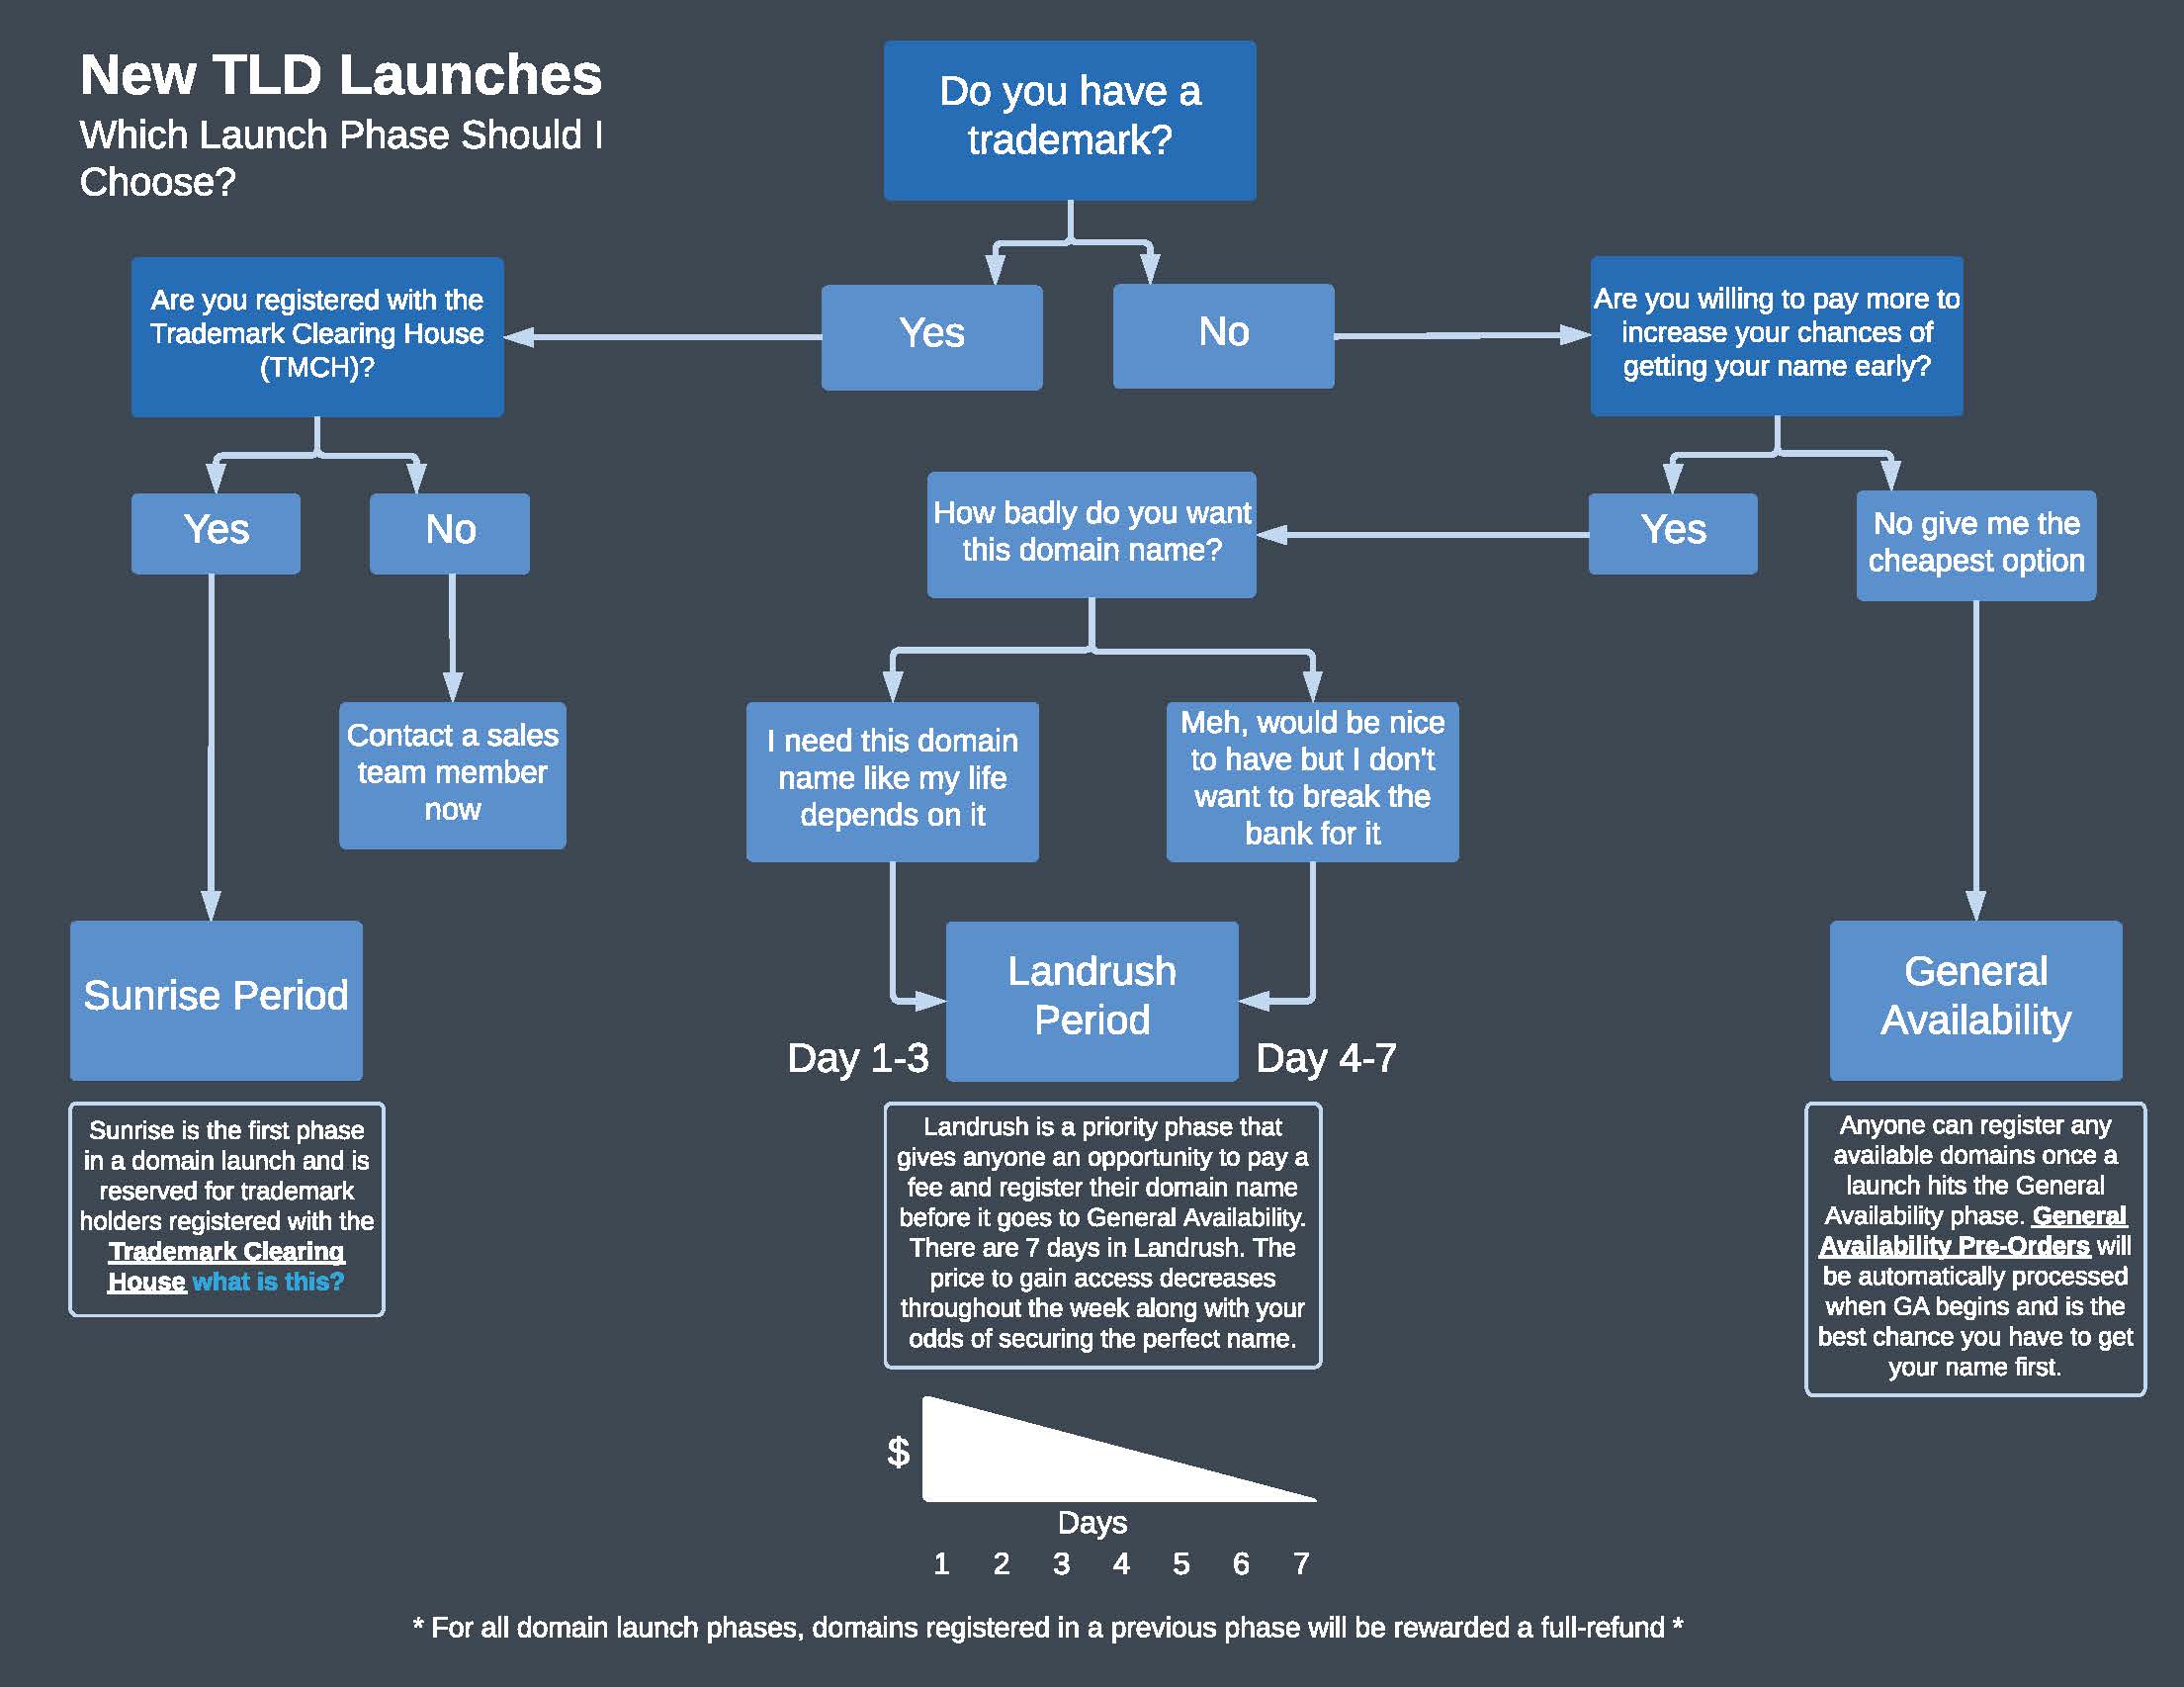 New TLD Launches Flowchart